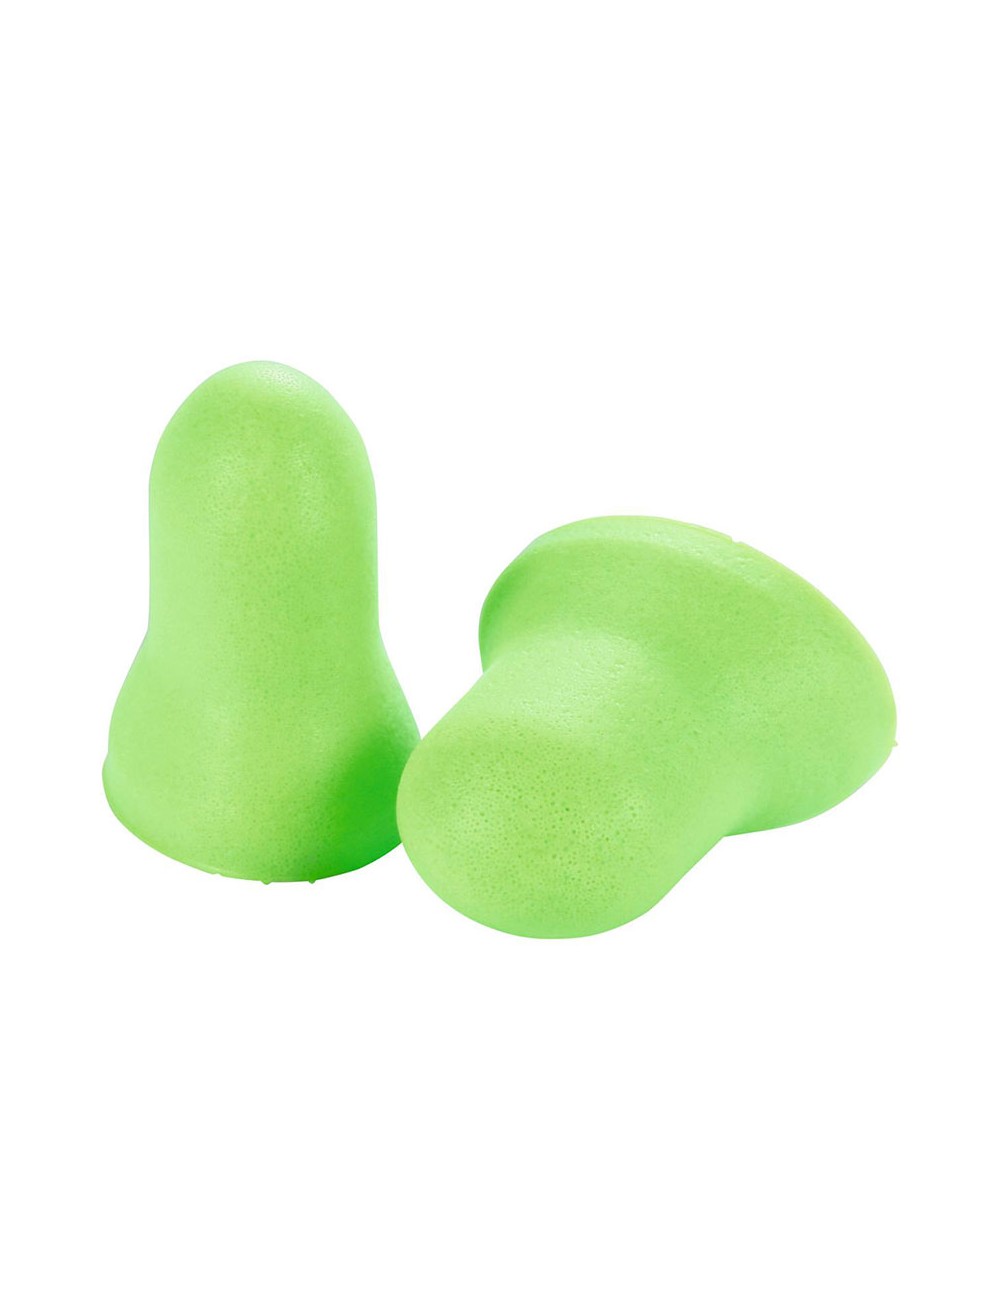 REPLACEMENT EAR PLUGS FOR...